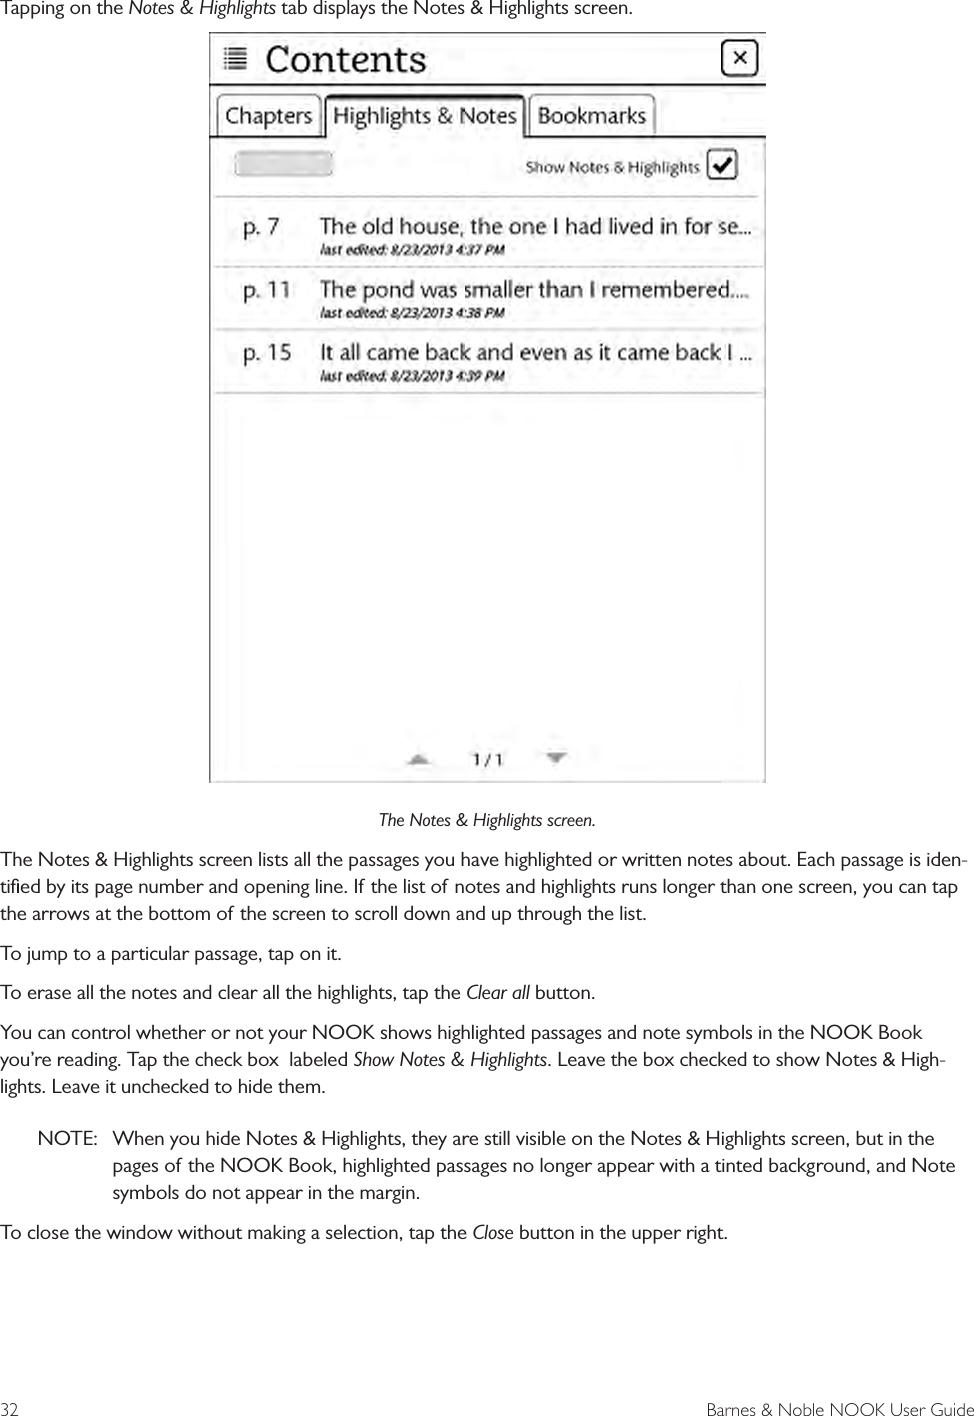 32  Barnes &amp; Noble NOOK User GuideTapping on the Notes &amp; Highlights tab displays the Notes &amp; Highlights screen.The Notes &amp; Highlights screen.The Notes &amp; Highlights screen lists all the passages you have highlighted or written notes about. Each passage is iden-tiﬁed by its page number and opening line. If the list of notes and highlights runs longer than one screen, you can tap the arrows at the bottom of the screen to scroll down and up through the list. To jump to a particular passage, tap on it. To erase all the notes and clear all the highlights, tap the Clear all button.You can control whether or not your NOOK shows highlighted passages and note symbols in the NOOK Book you’re reading. Tap the check box  labeled Show Notes &amp; Highlights. Leave the box checked to show Notes &amp; High-lights. Leave it unchecked to hide them. NOTE:  When you hide Notes &amp; Highlights, they are still visible on the Notes &amp; Highlights screen, but in the pages of the NOOK Book, highlighted passages no longer appear with a tinted background, and Note symbols do not appear in the margin.To close the window without making a selection, tap the Close button in the upper right.